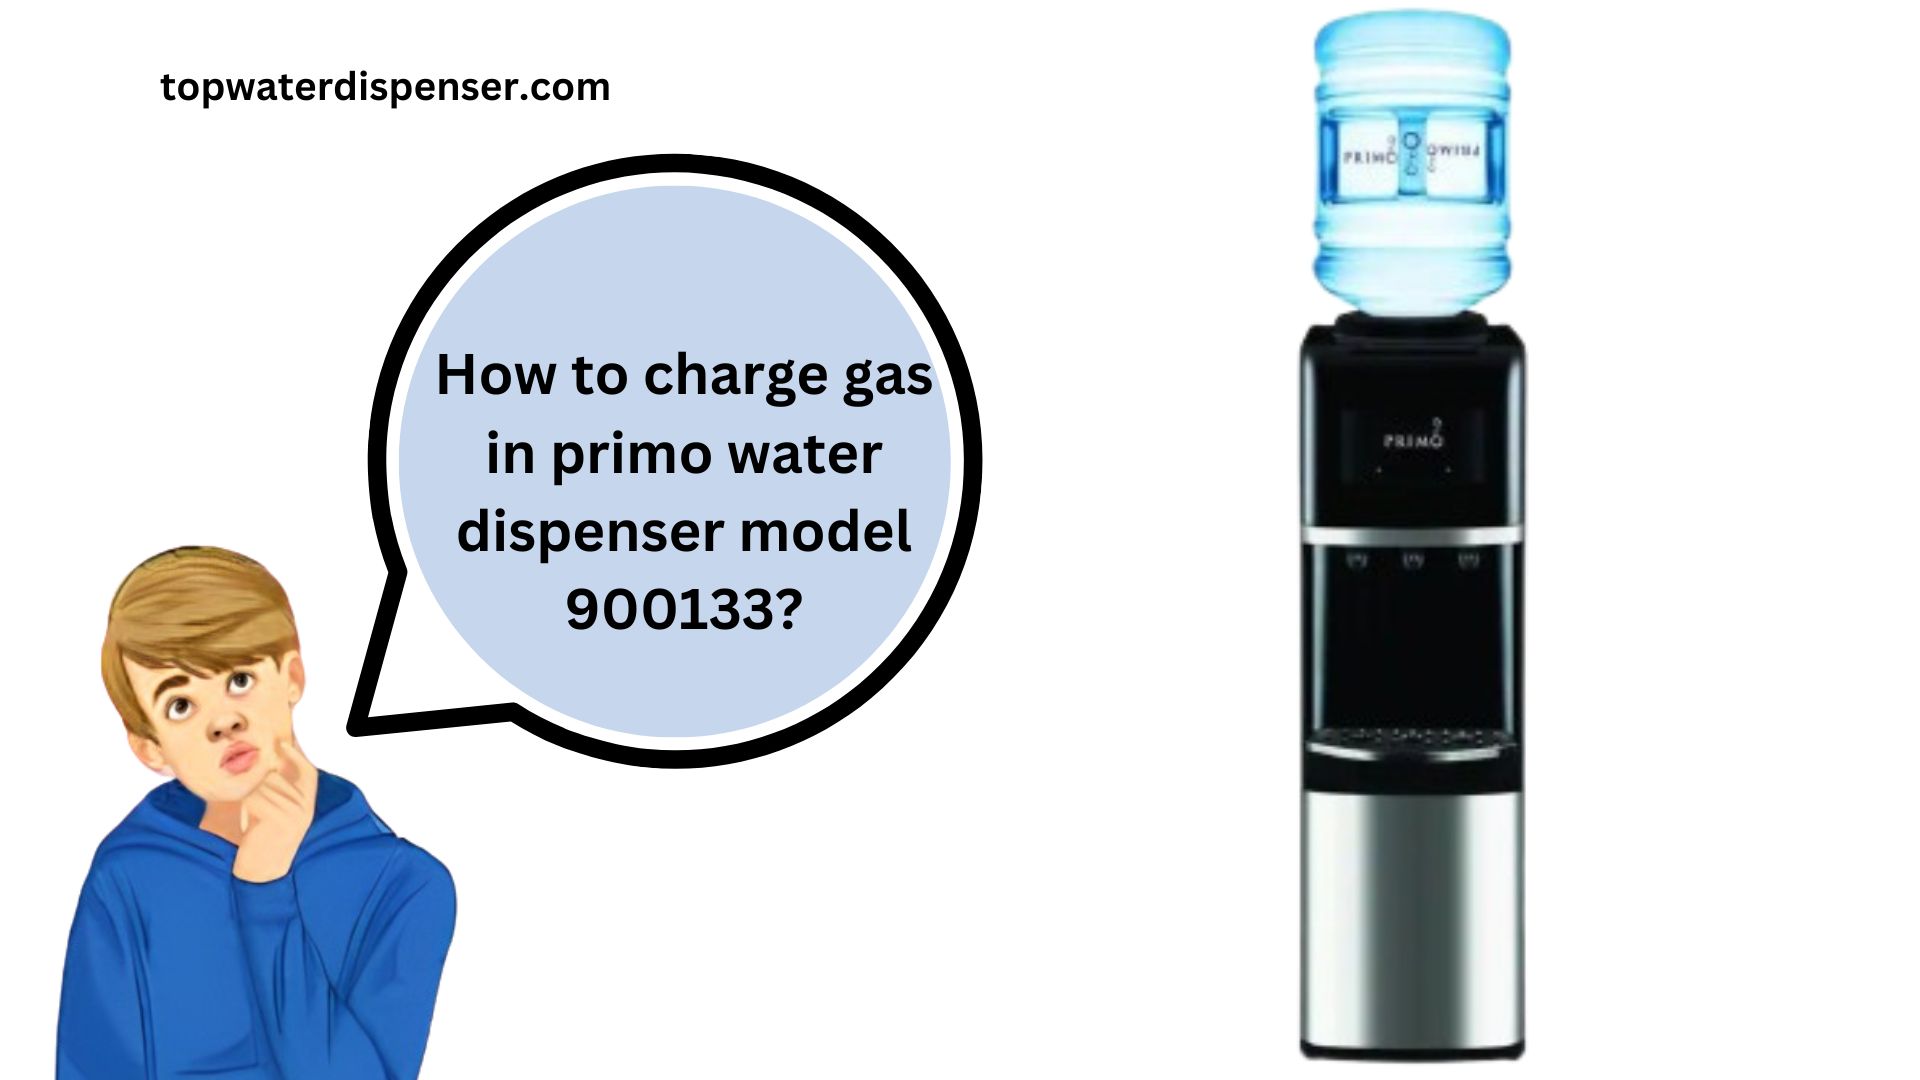 How to charge gas in primo water dispenser model 900133?